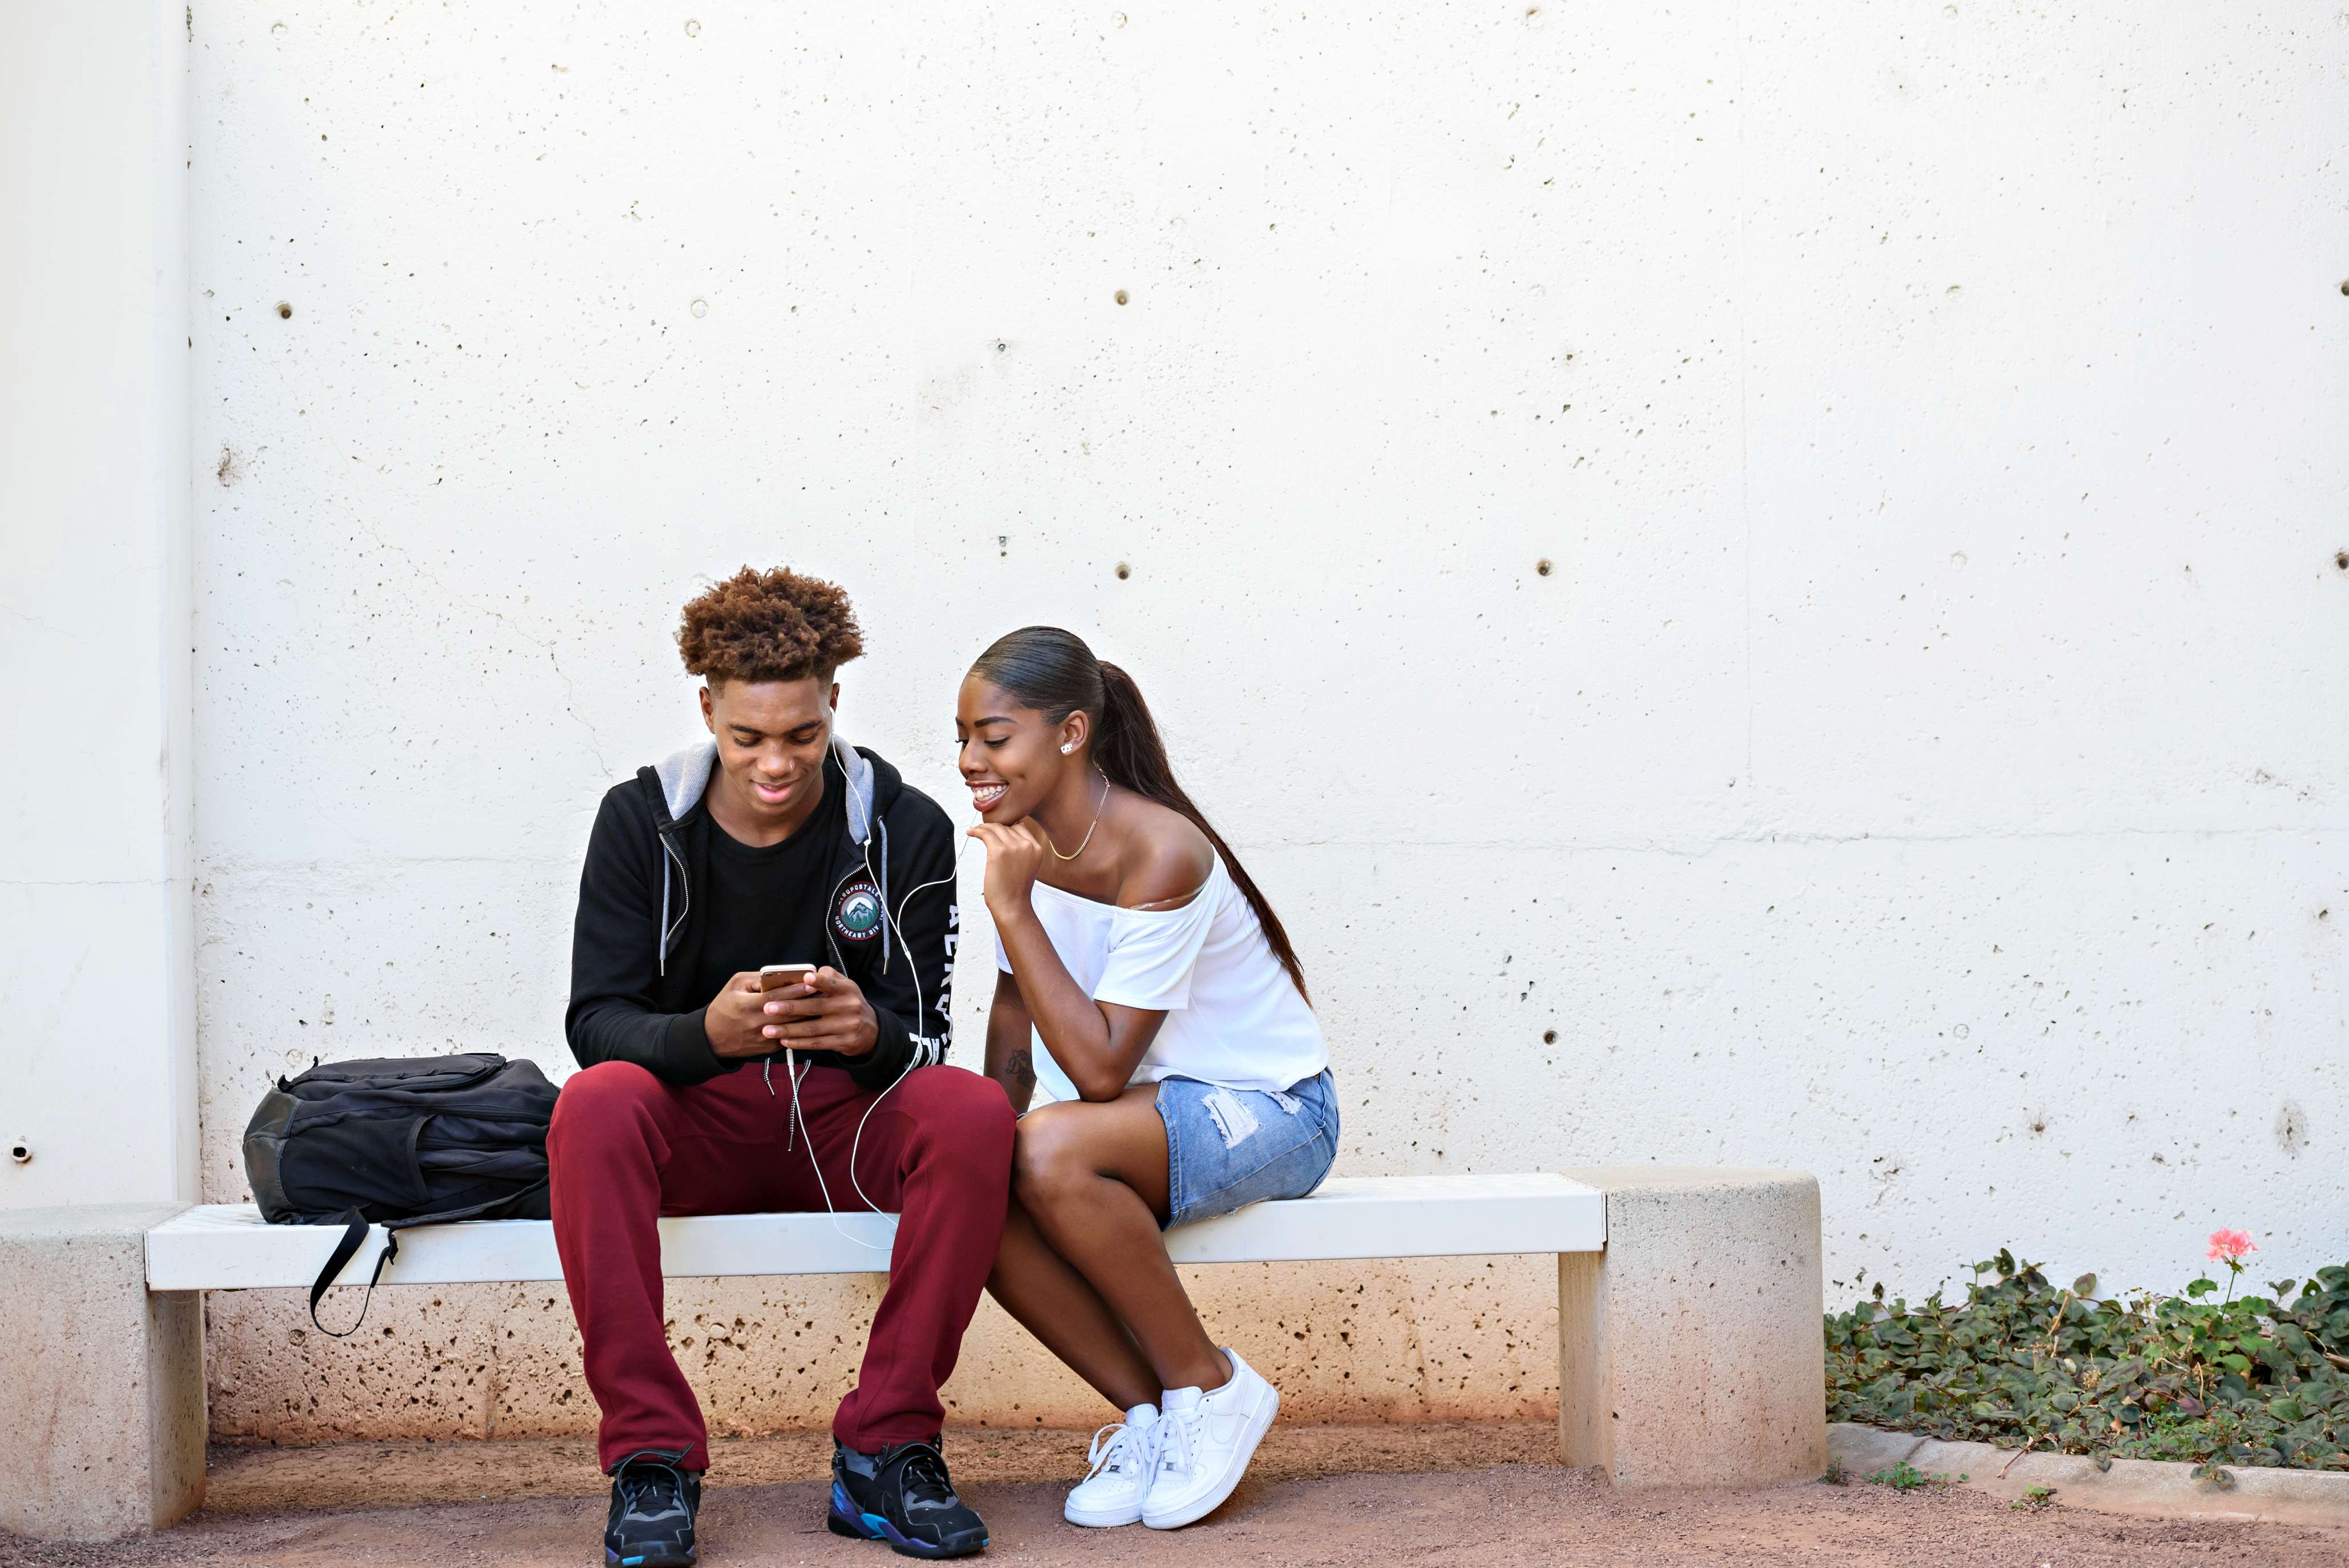 Students talking and laughing at a bench